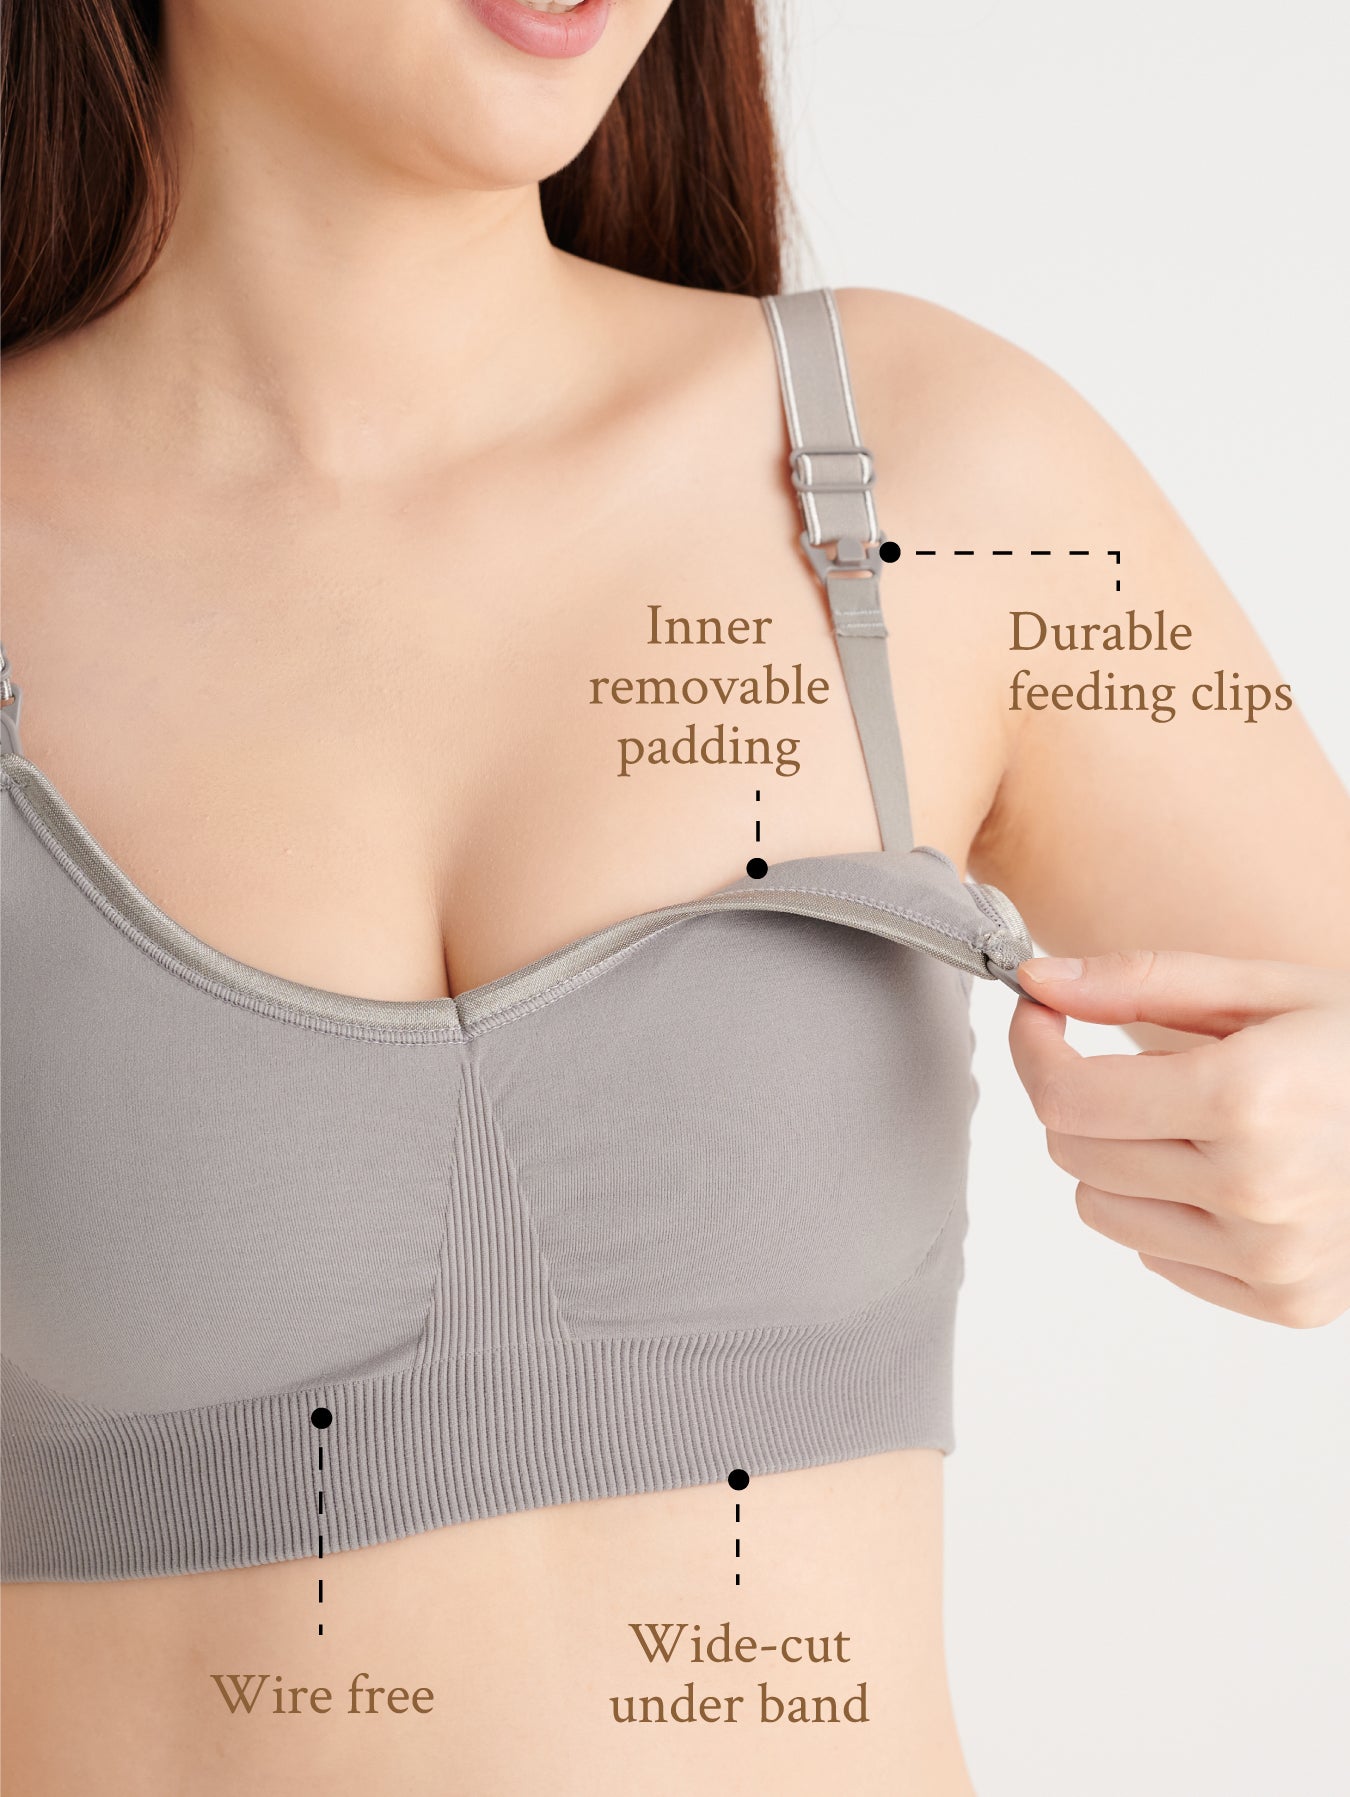 Comfortable nursing bra with support for new moms